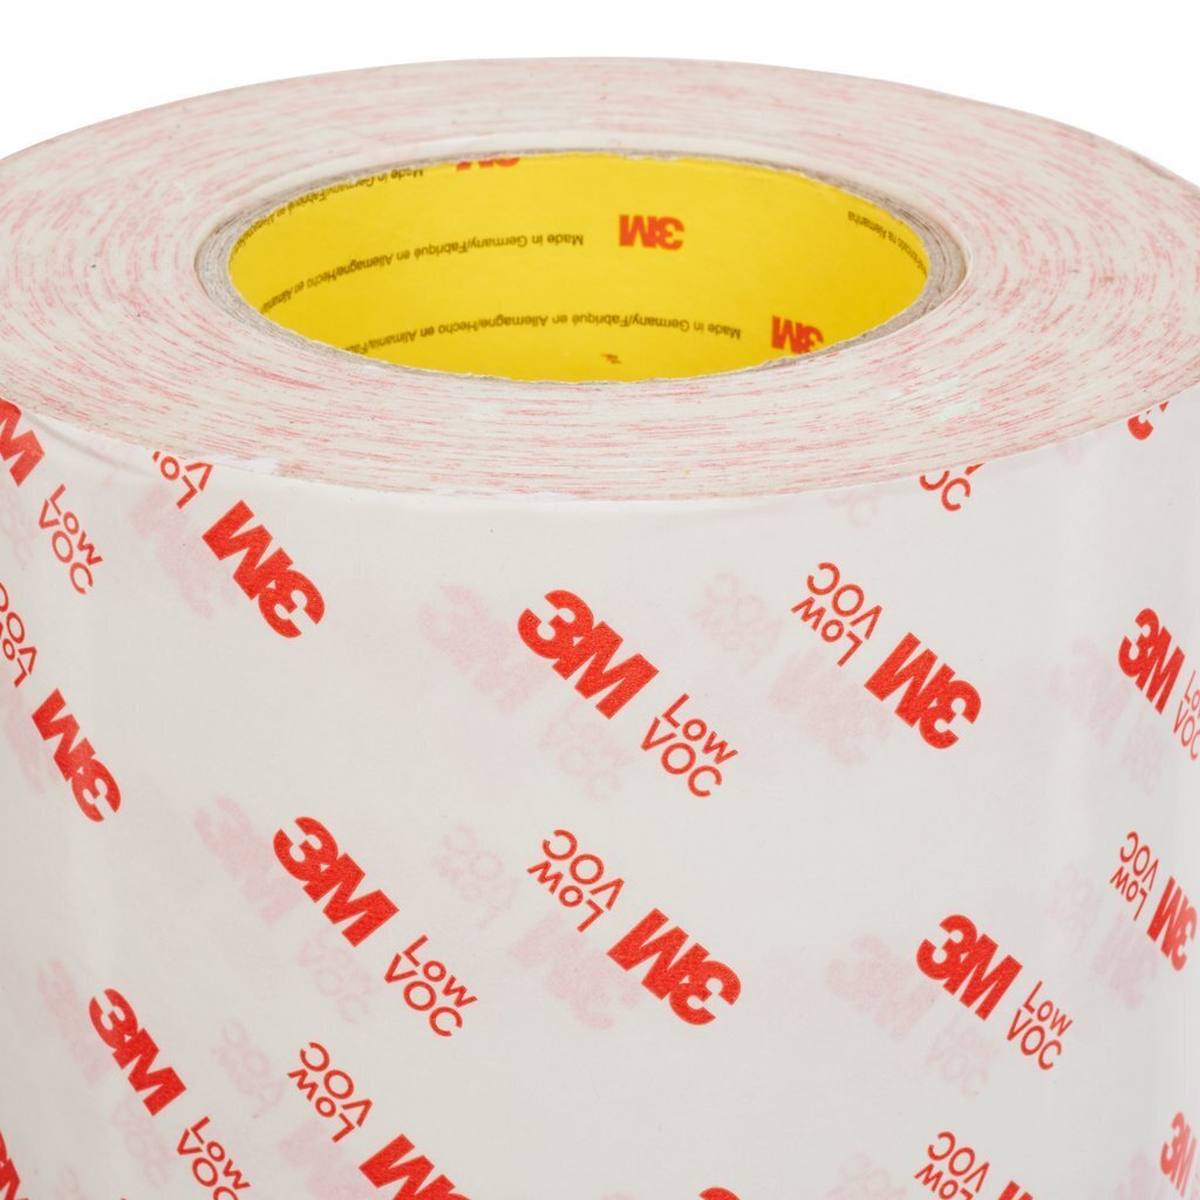 3M Double-sided adhesive tape with non-woven paper backing 99015LVC, white, 25 mm x 50 m, 0.15 mm